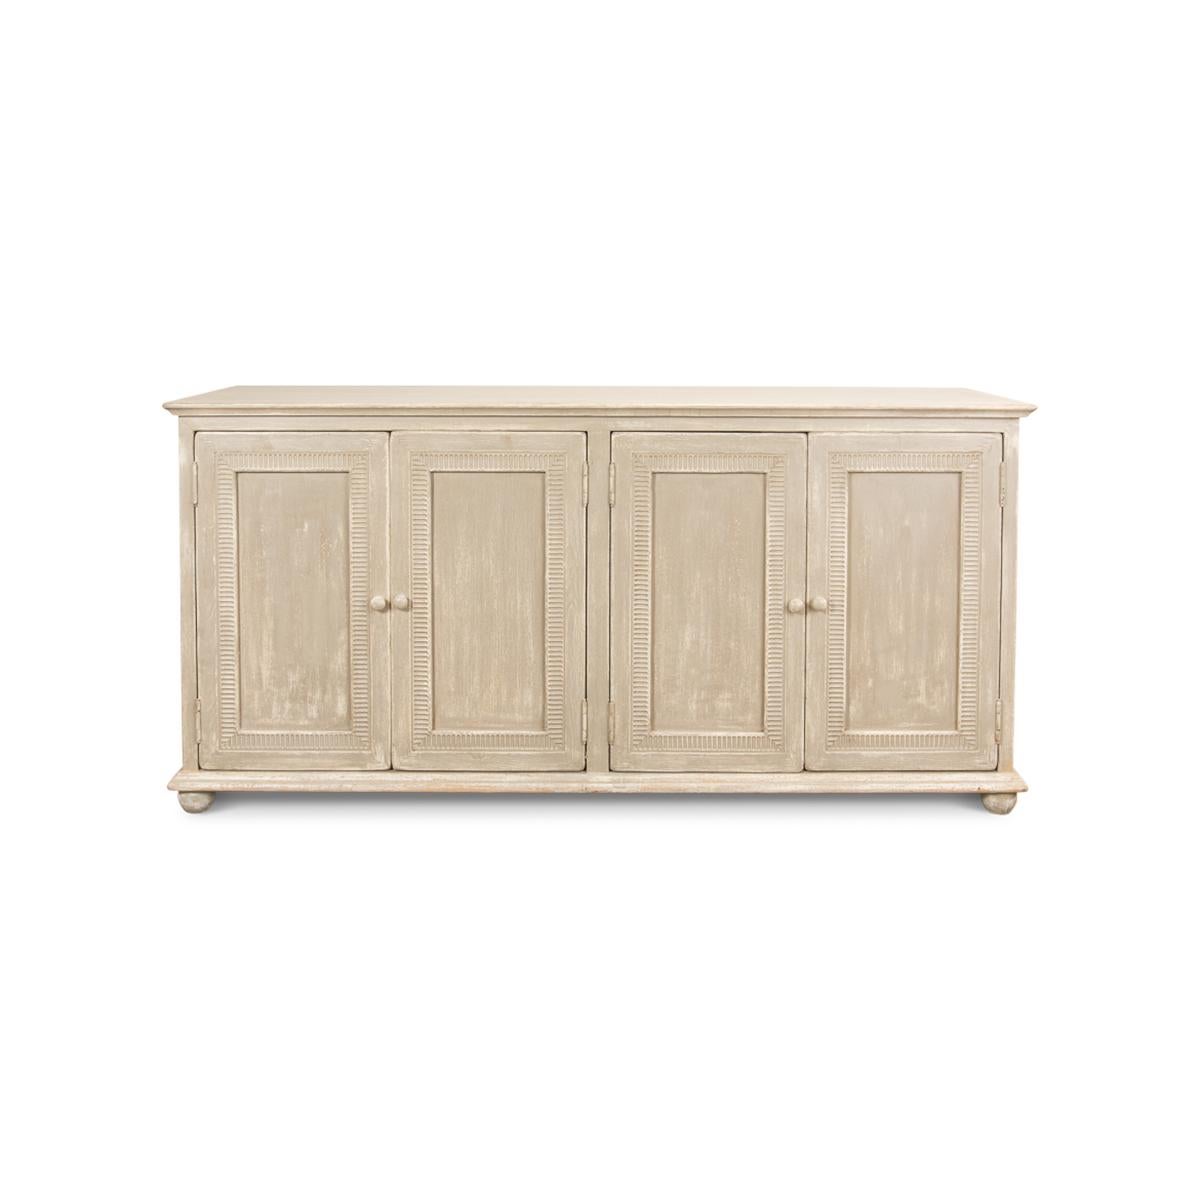 Made of pine with an antiqued and distressed hand-painted finish in a coastal beach beige color. With four doors framed in a classic American pie crust detail.

Dimensions: 76